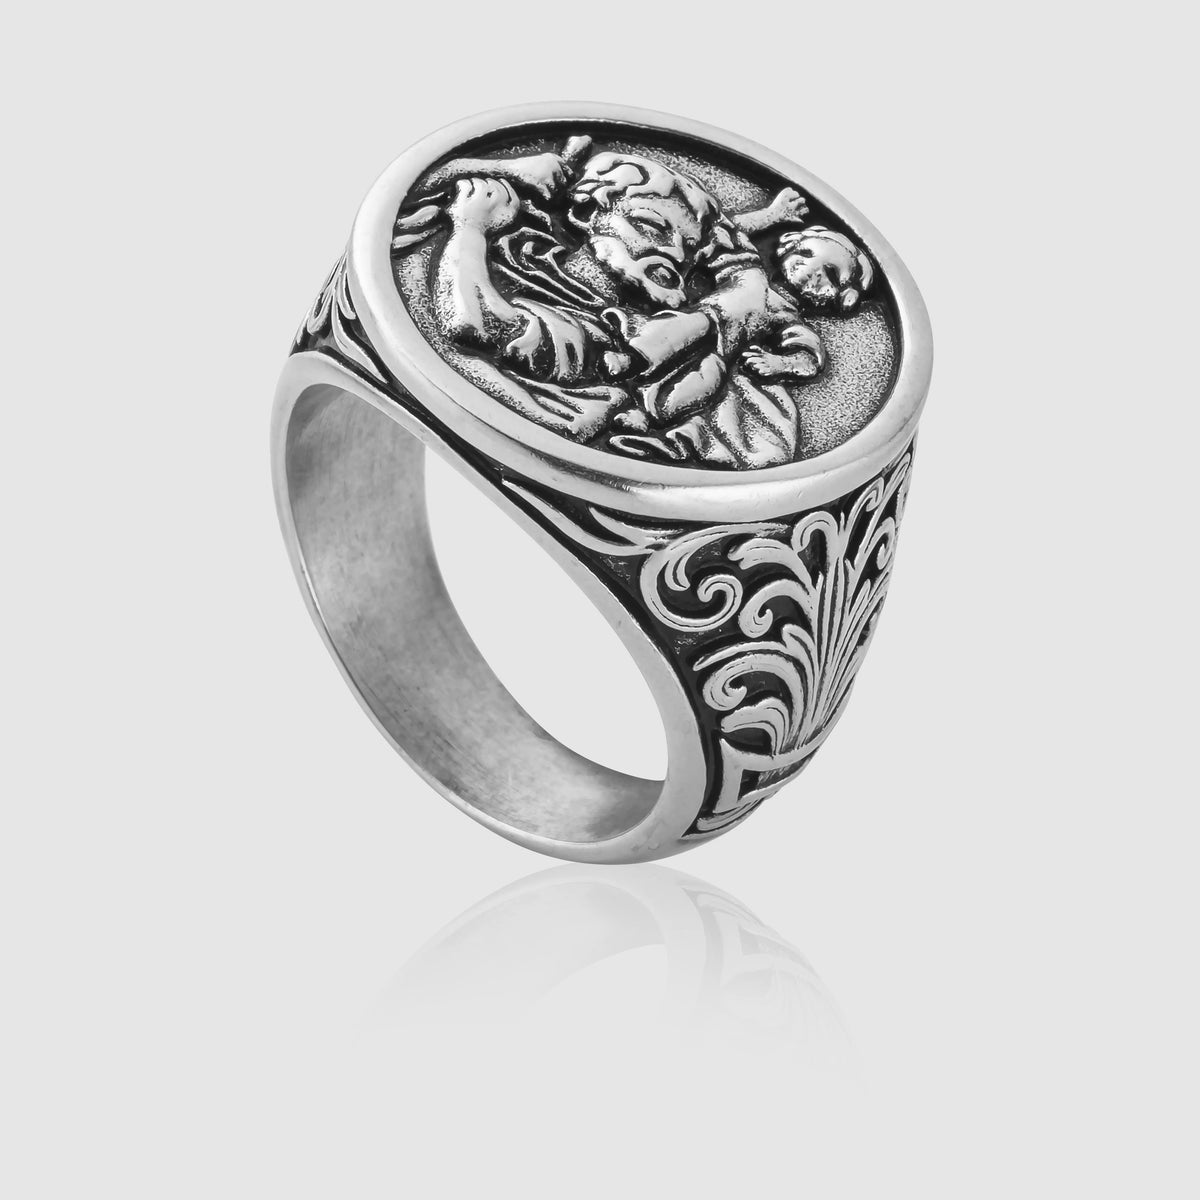 Trending Wholesale saint christopher ring At An Affordable Price